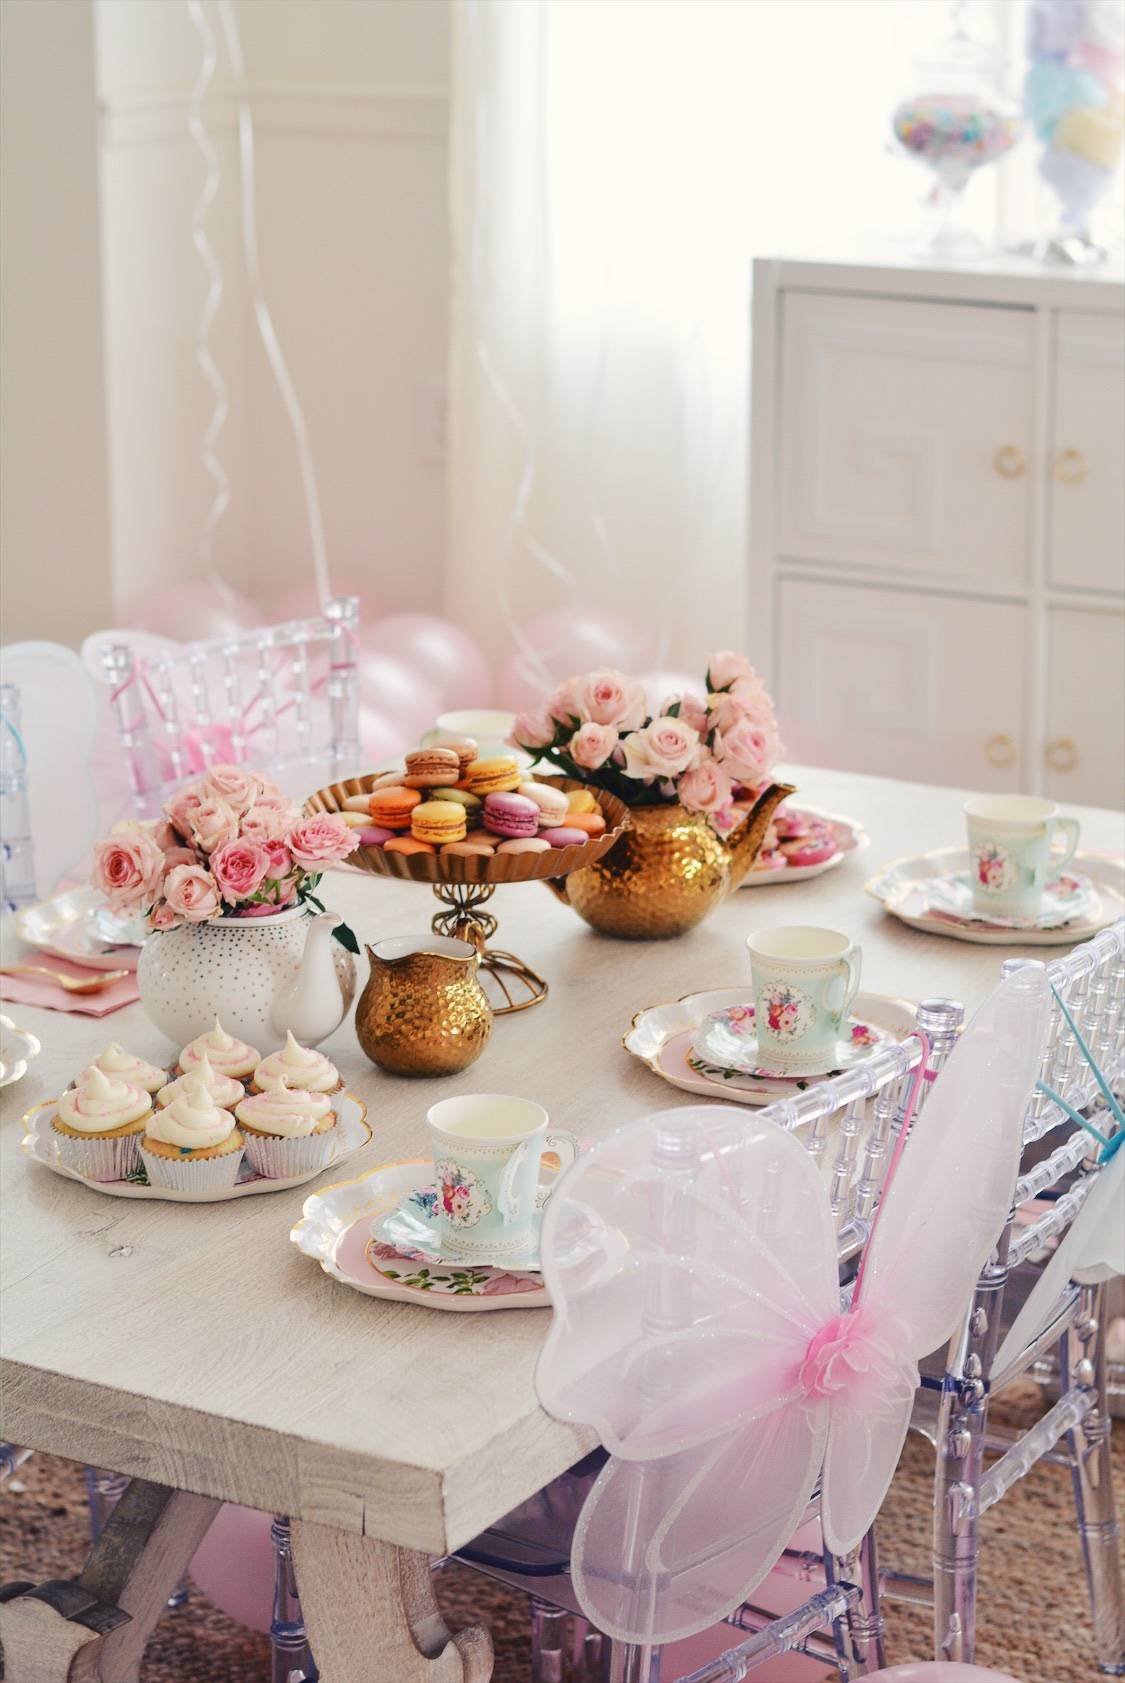 Princess Tea Party: Birthday Party Ideas for a 3 Year Old - The Pink Dream